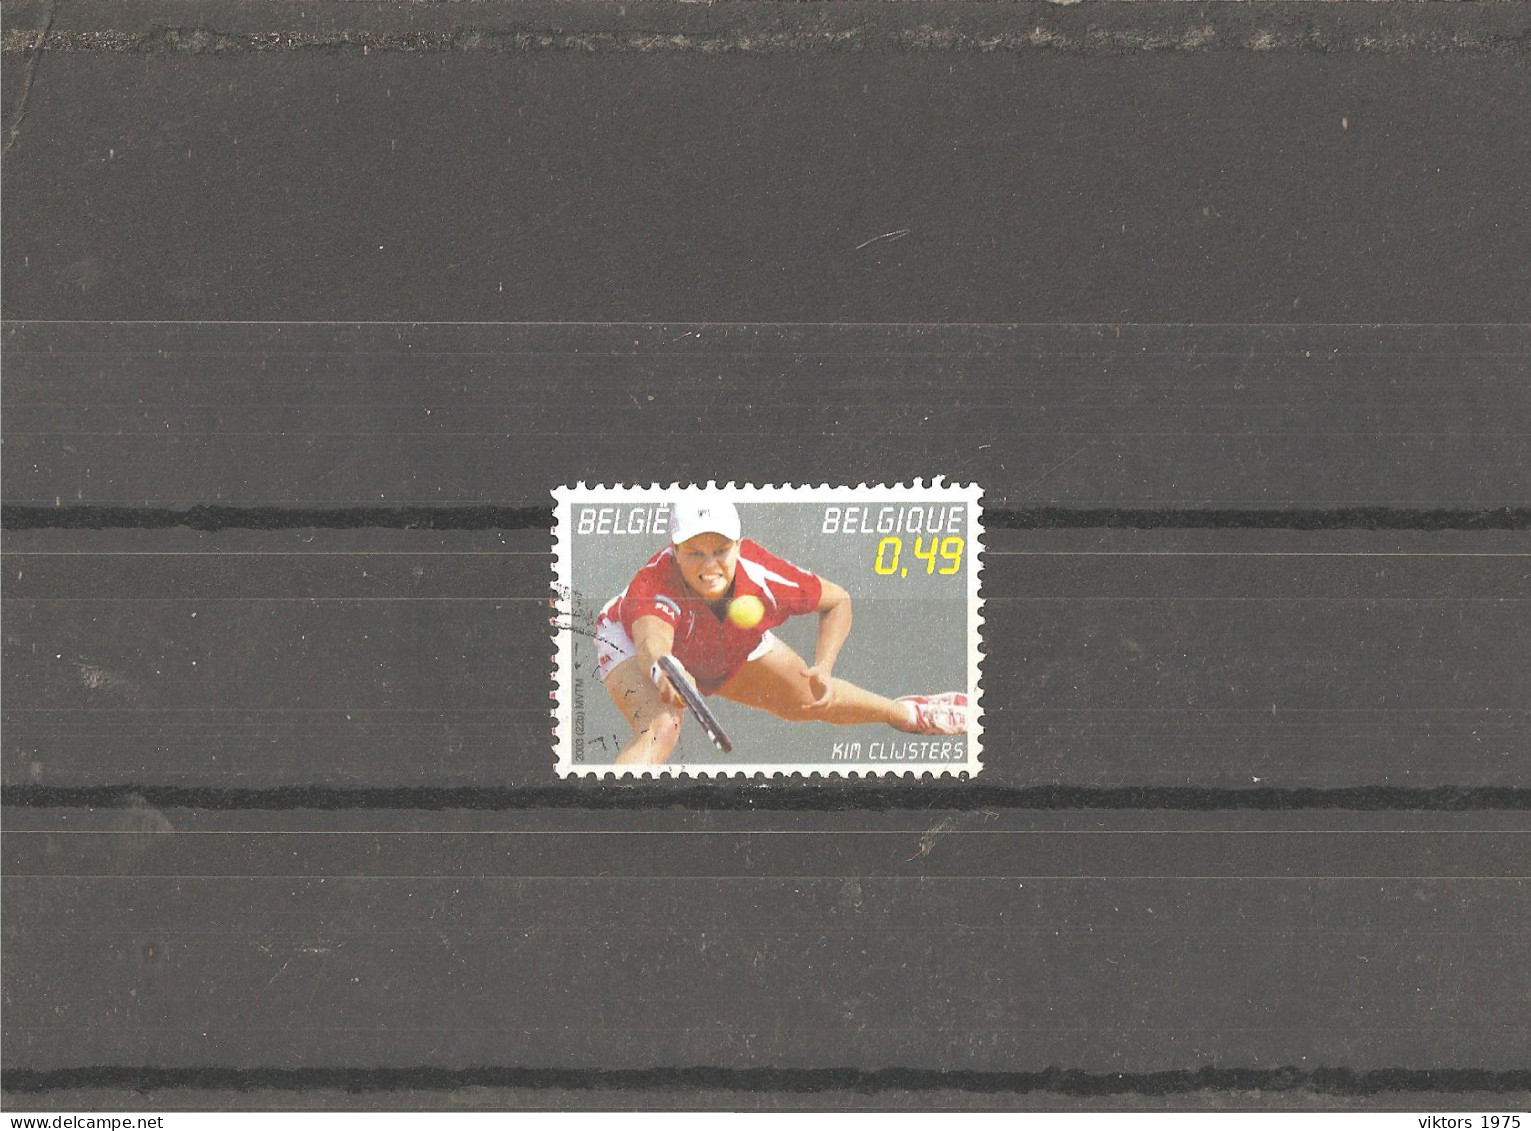 Used Stamp Nr.3275 In MICHEL Catalog - Used Stamps